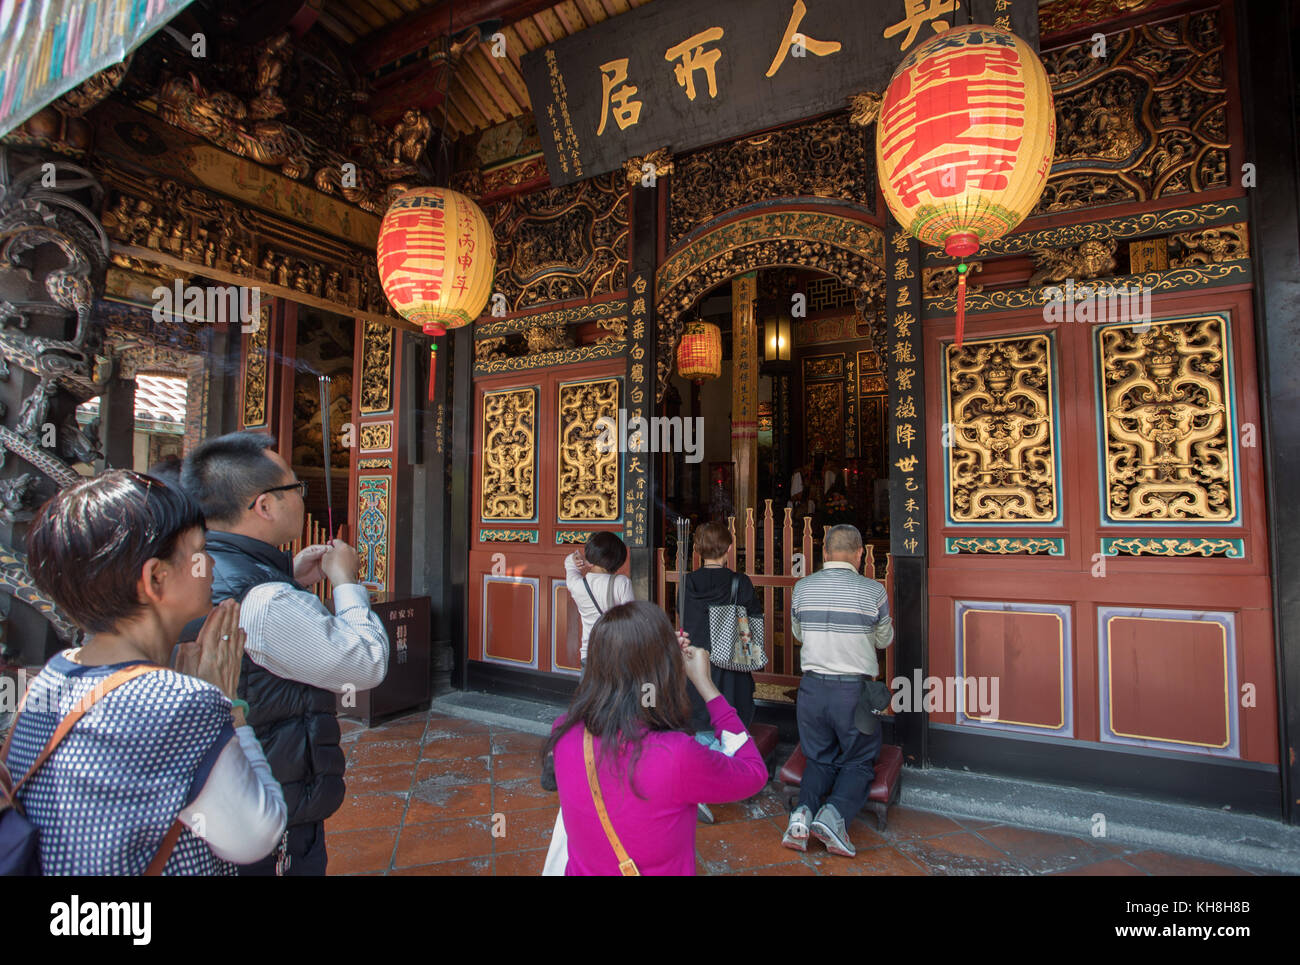 Taiwan, Taipei City, Bao´an temple *** Local Caption *** architecture, art, Bao´an, chinese, colorful, decoration, detail, gate, Interior, l, no peopl Stock Photo